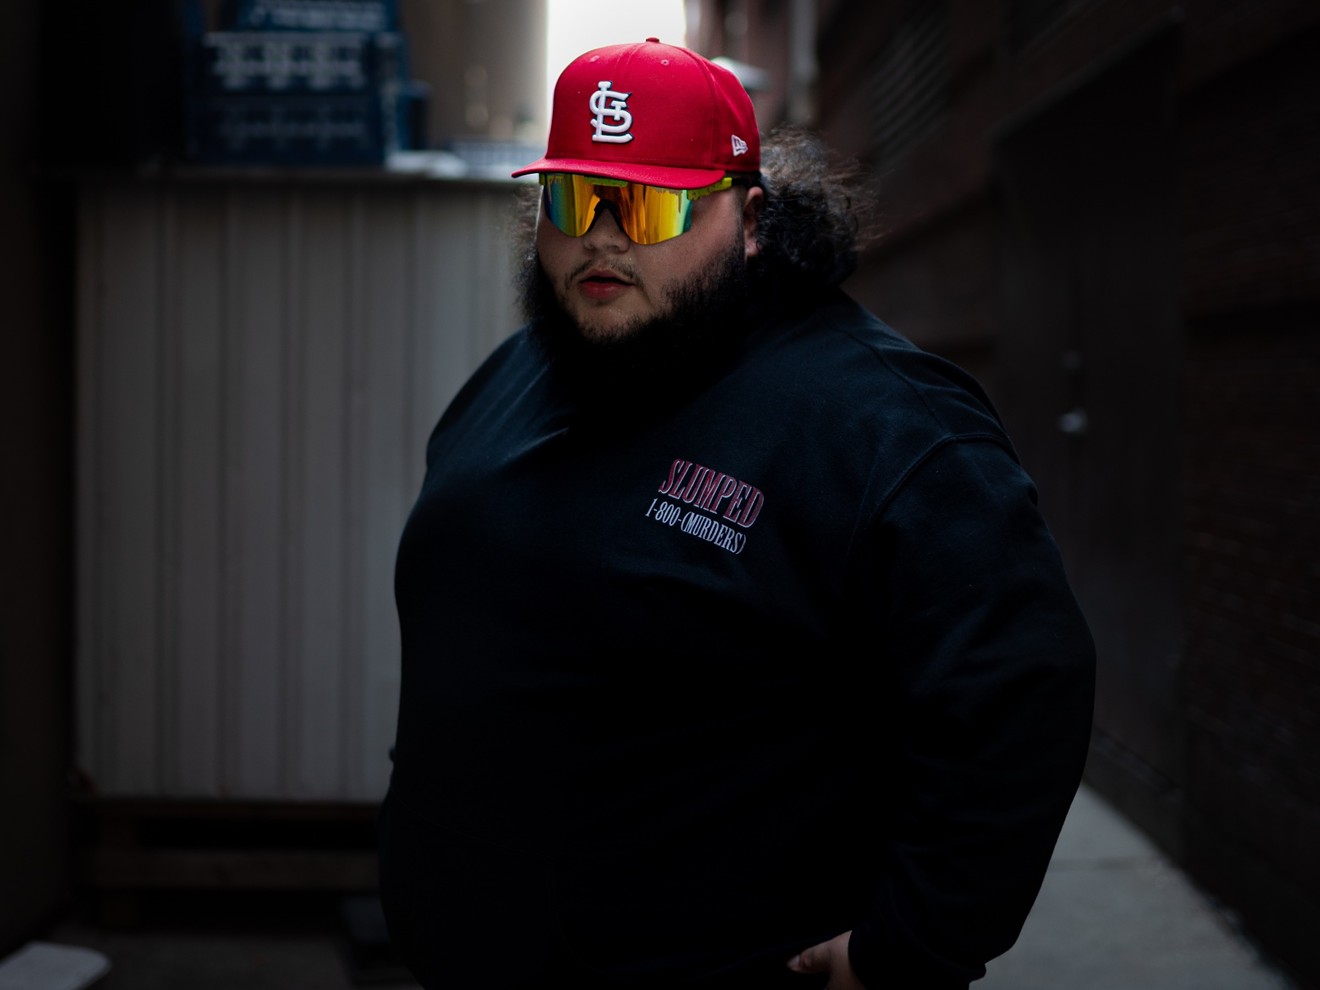 Northside Houston rapper Bo Bundy has signed to L.A. regional Mexican label Rancho Humilde.